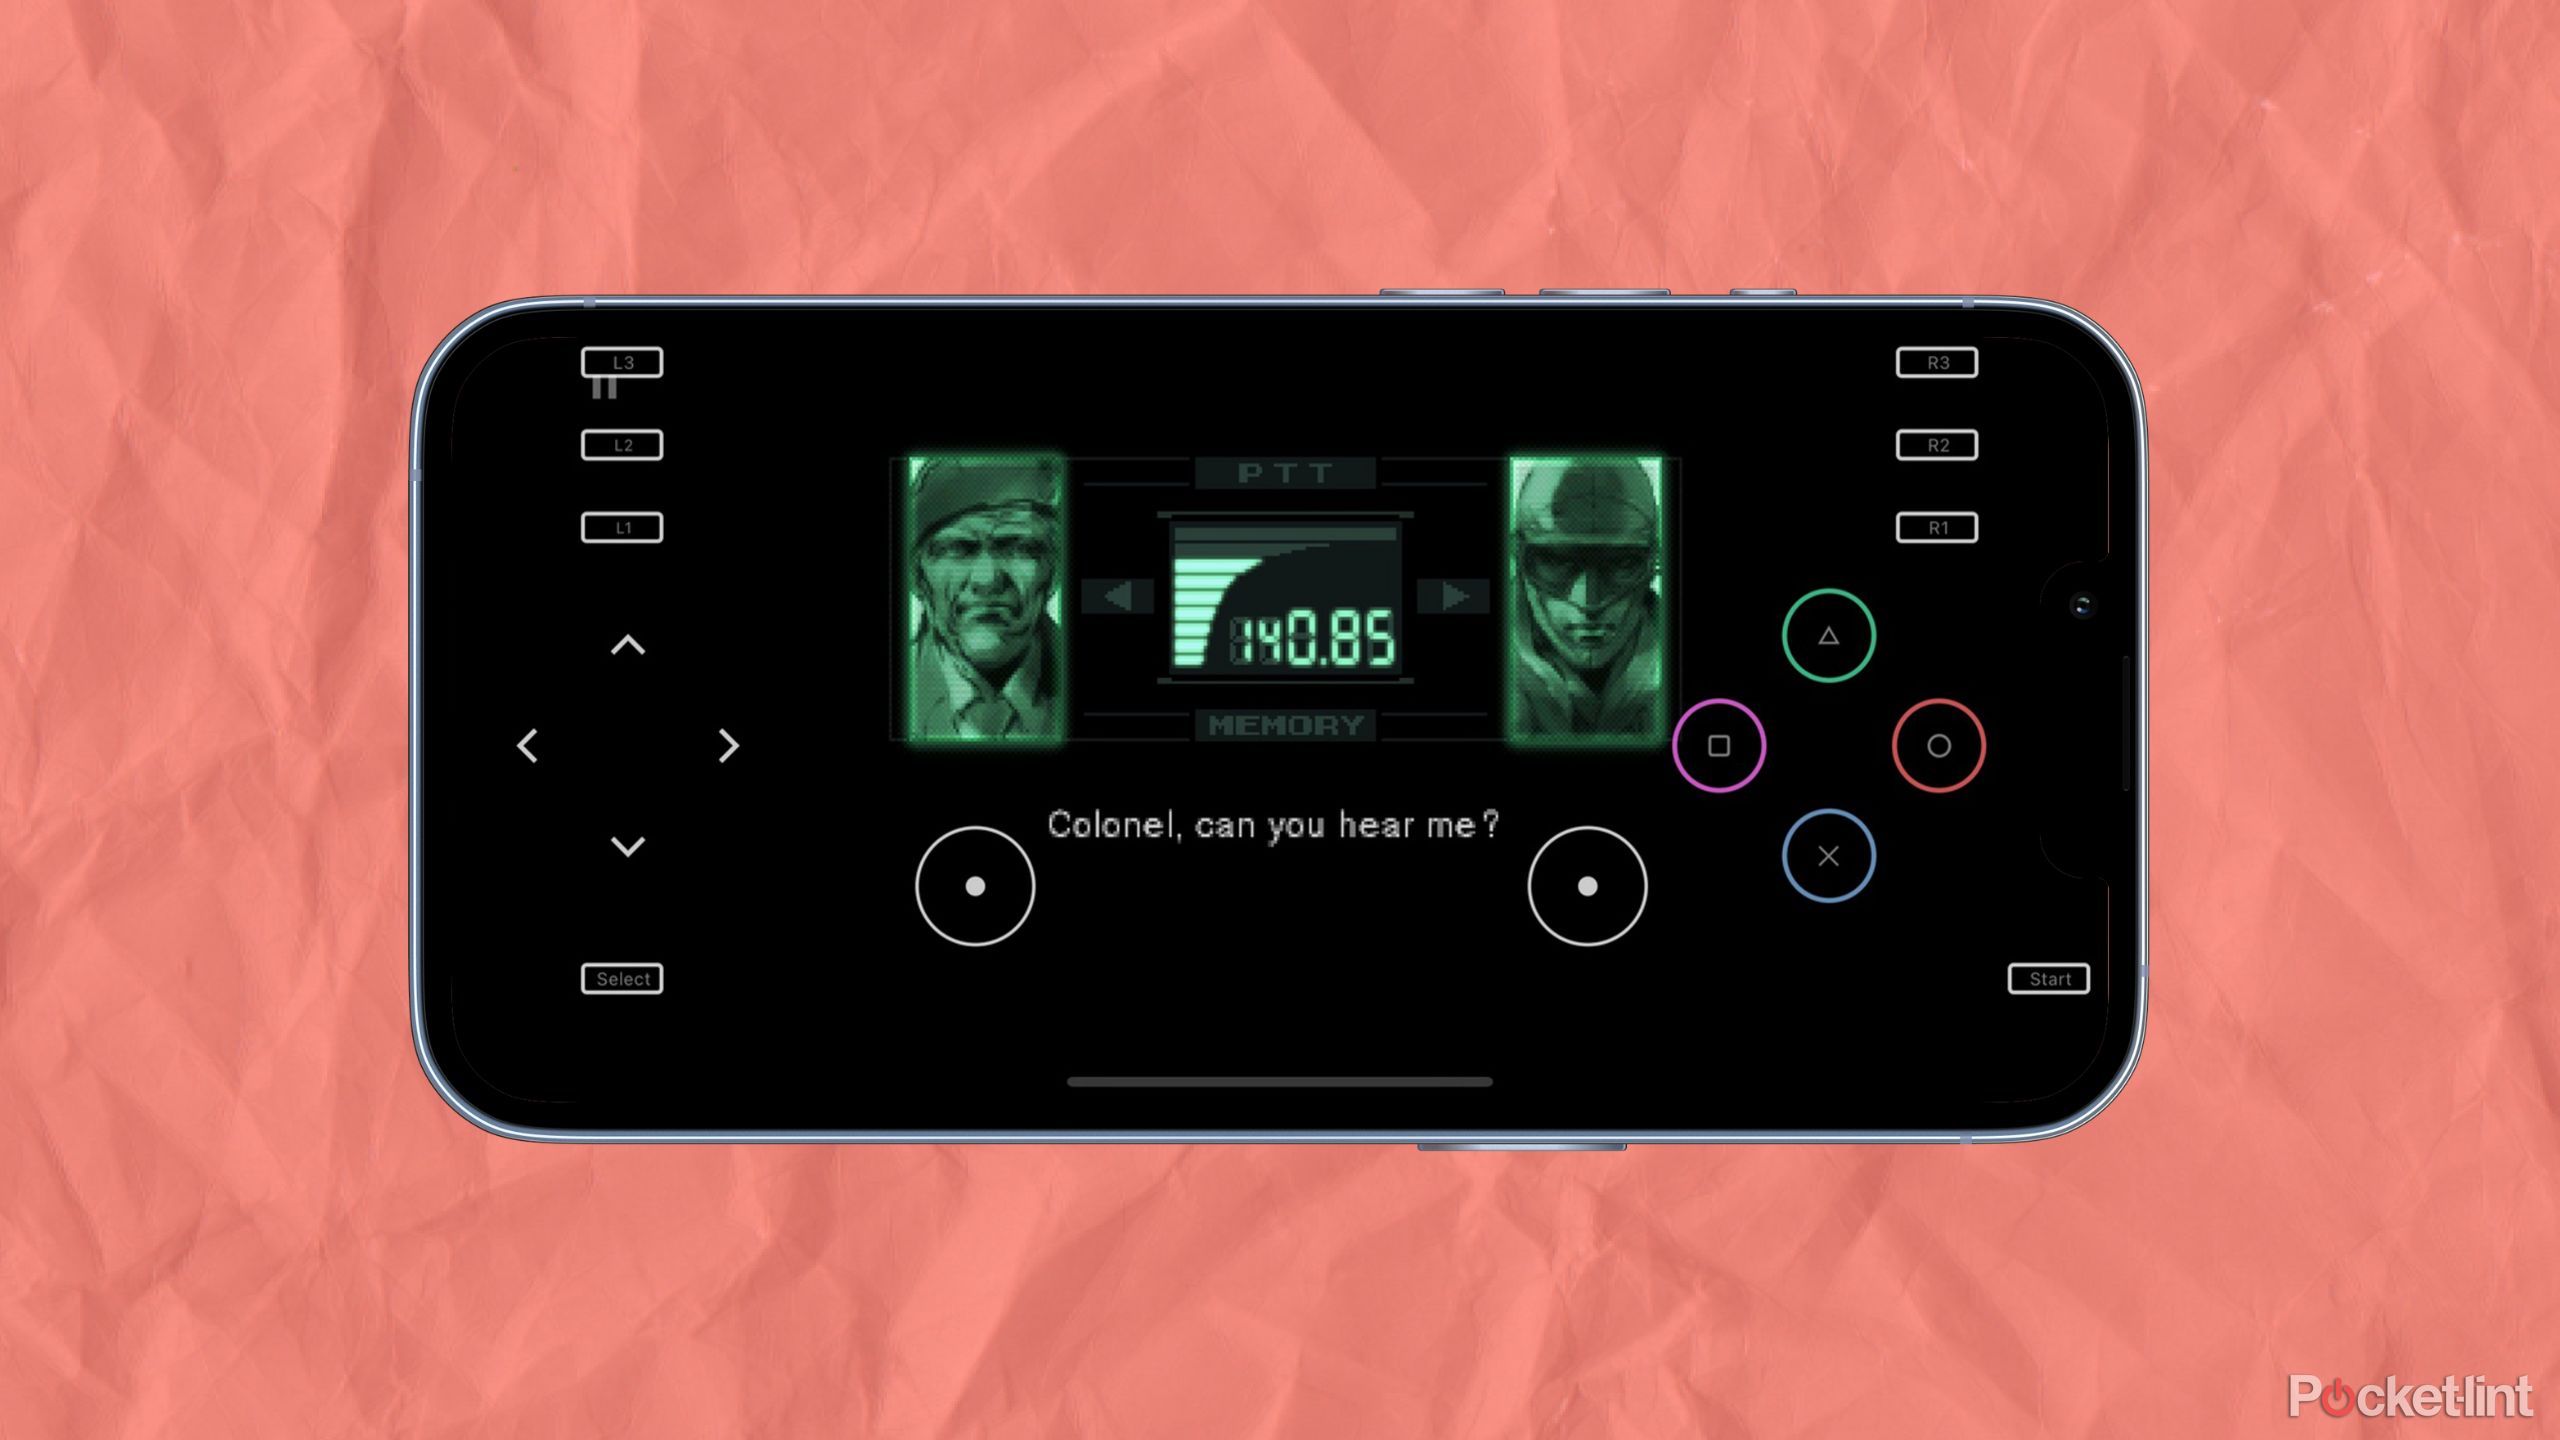 Metal Gear Solid emulated on an iPhone.